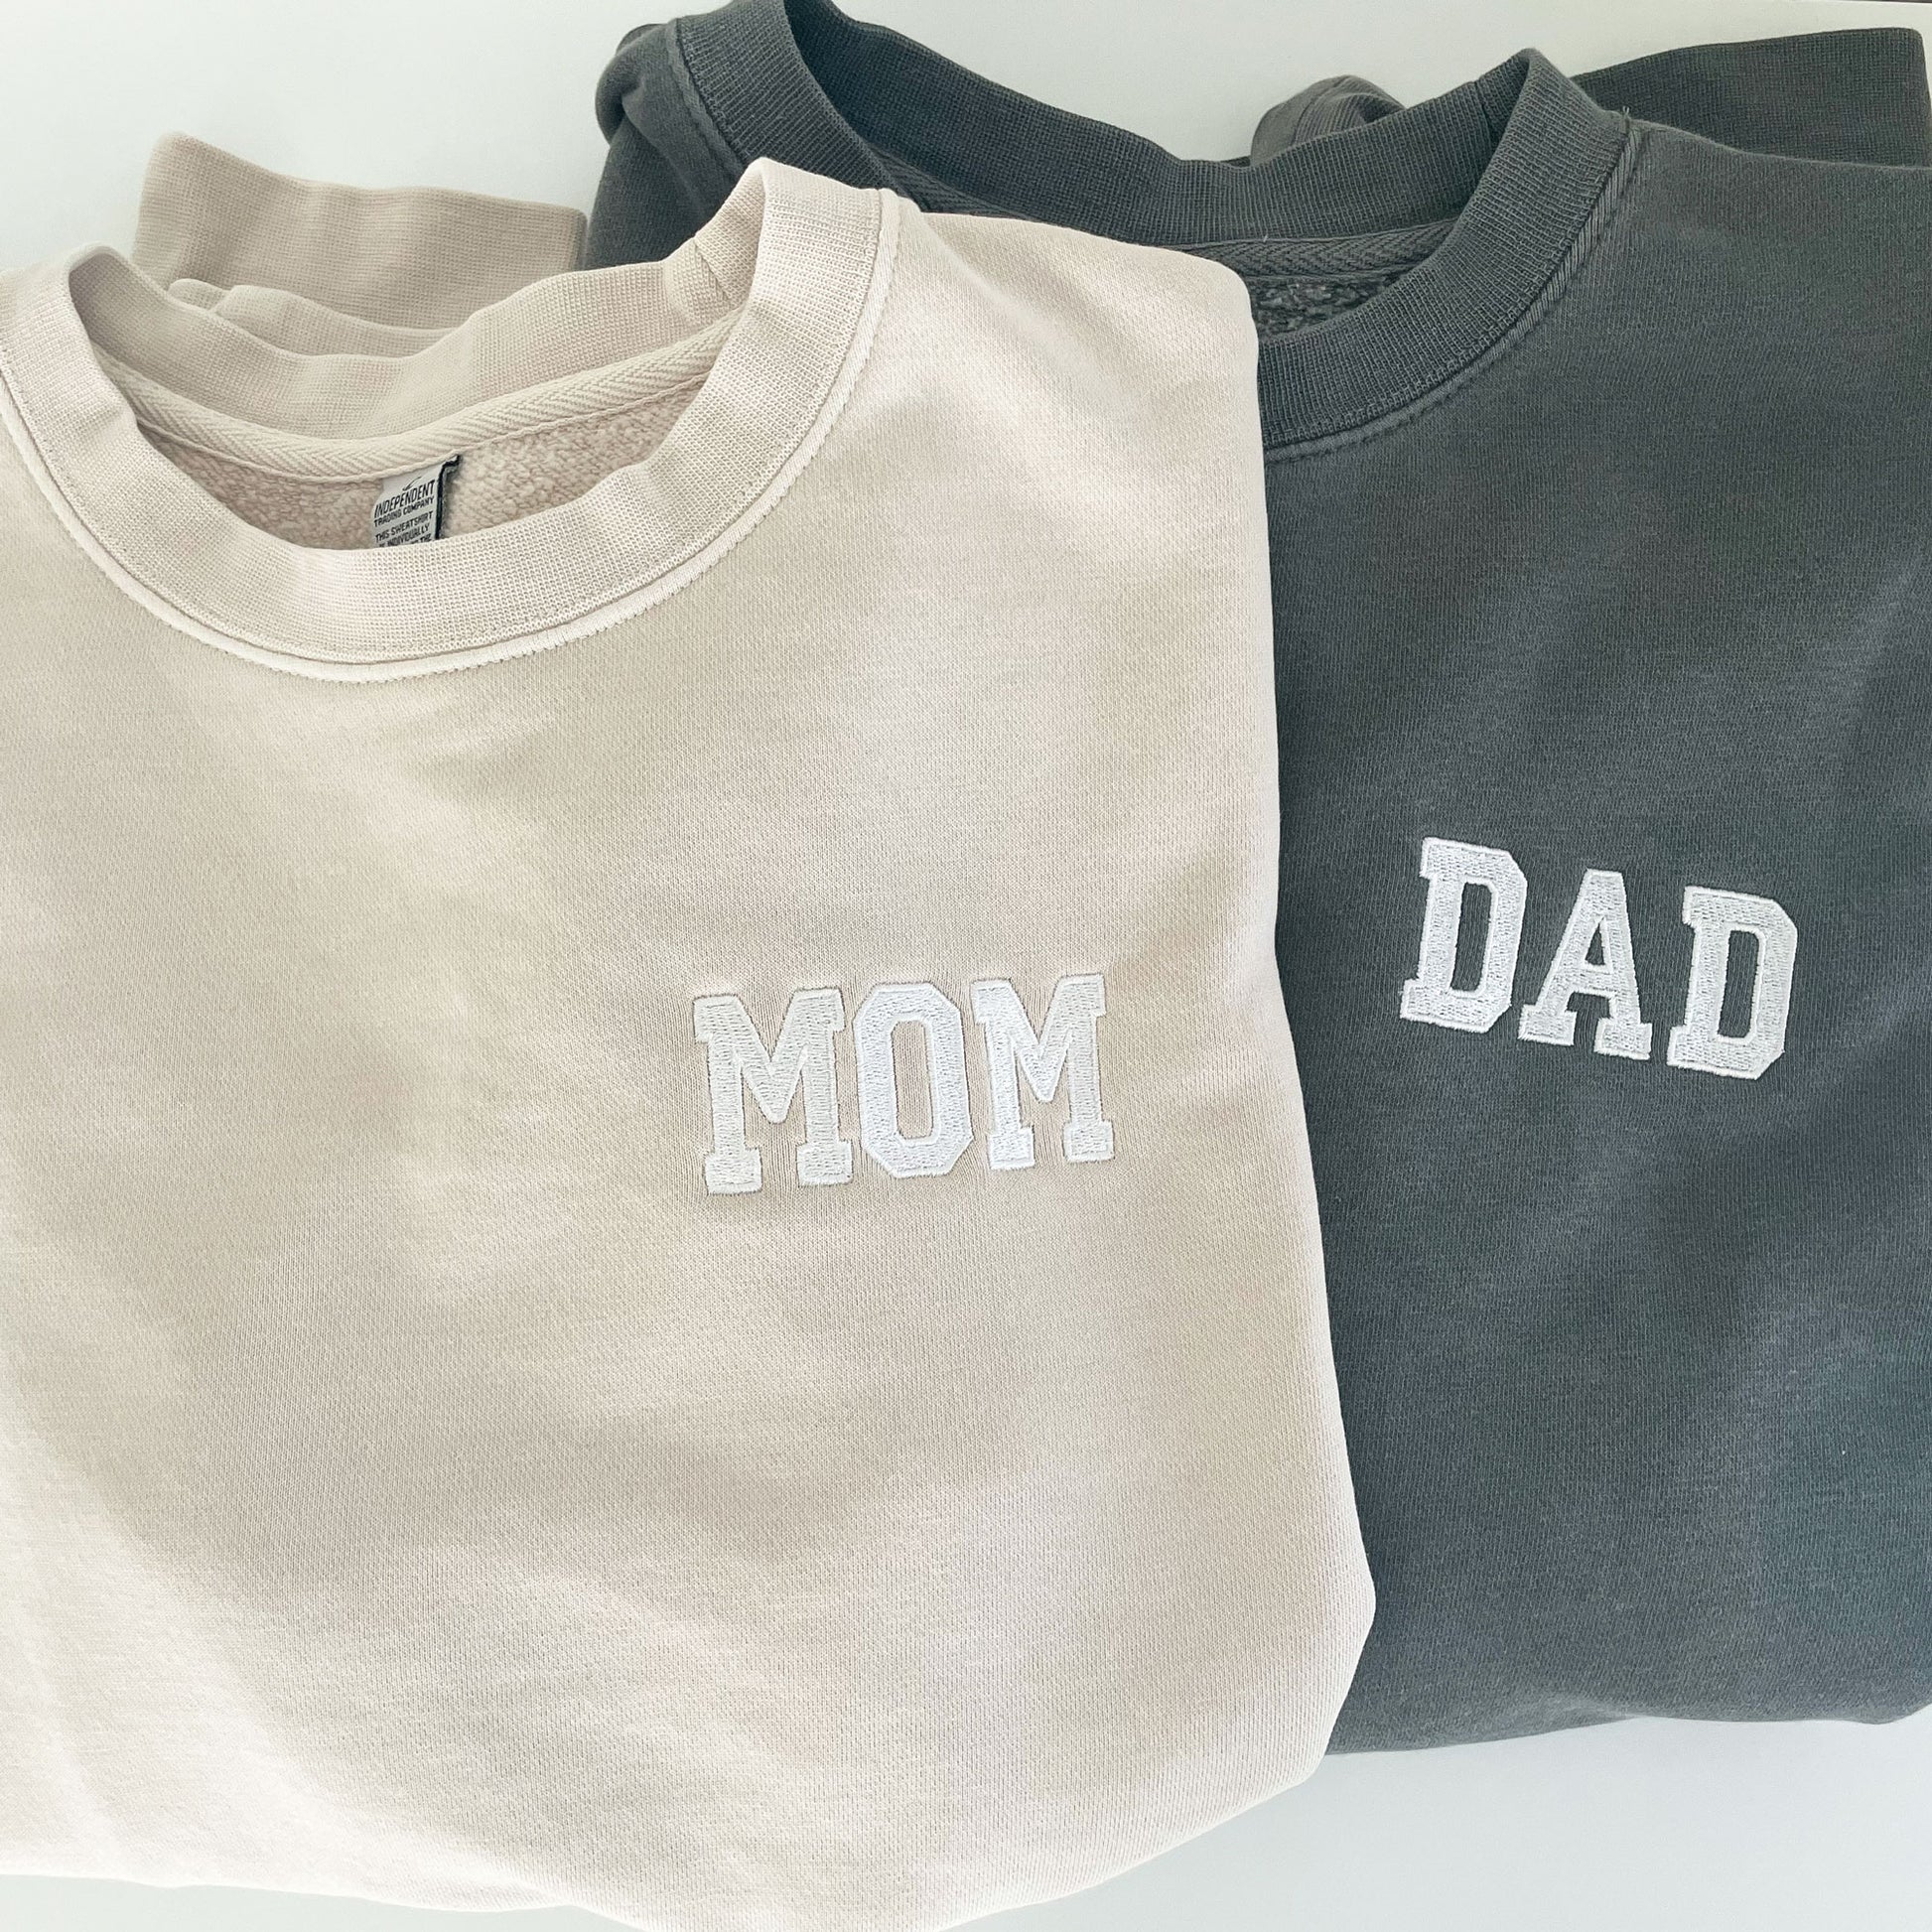 Mom and dad embroidered crewneck sweatshirts in cement and black colors. 